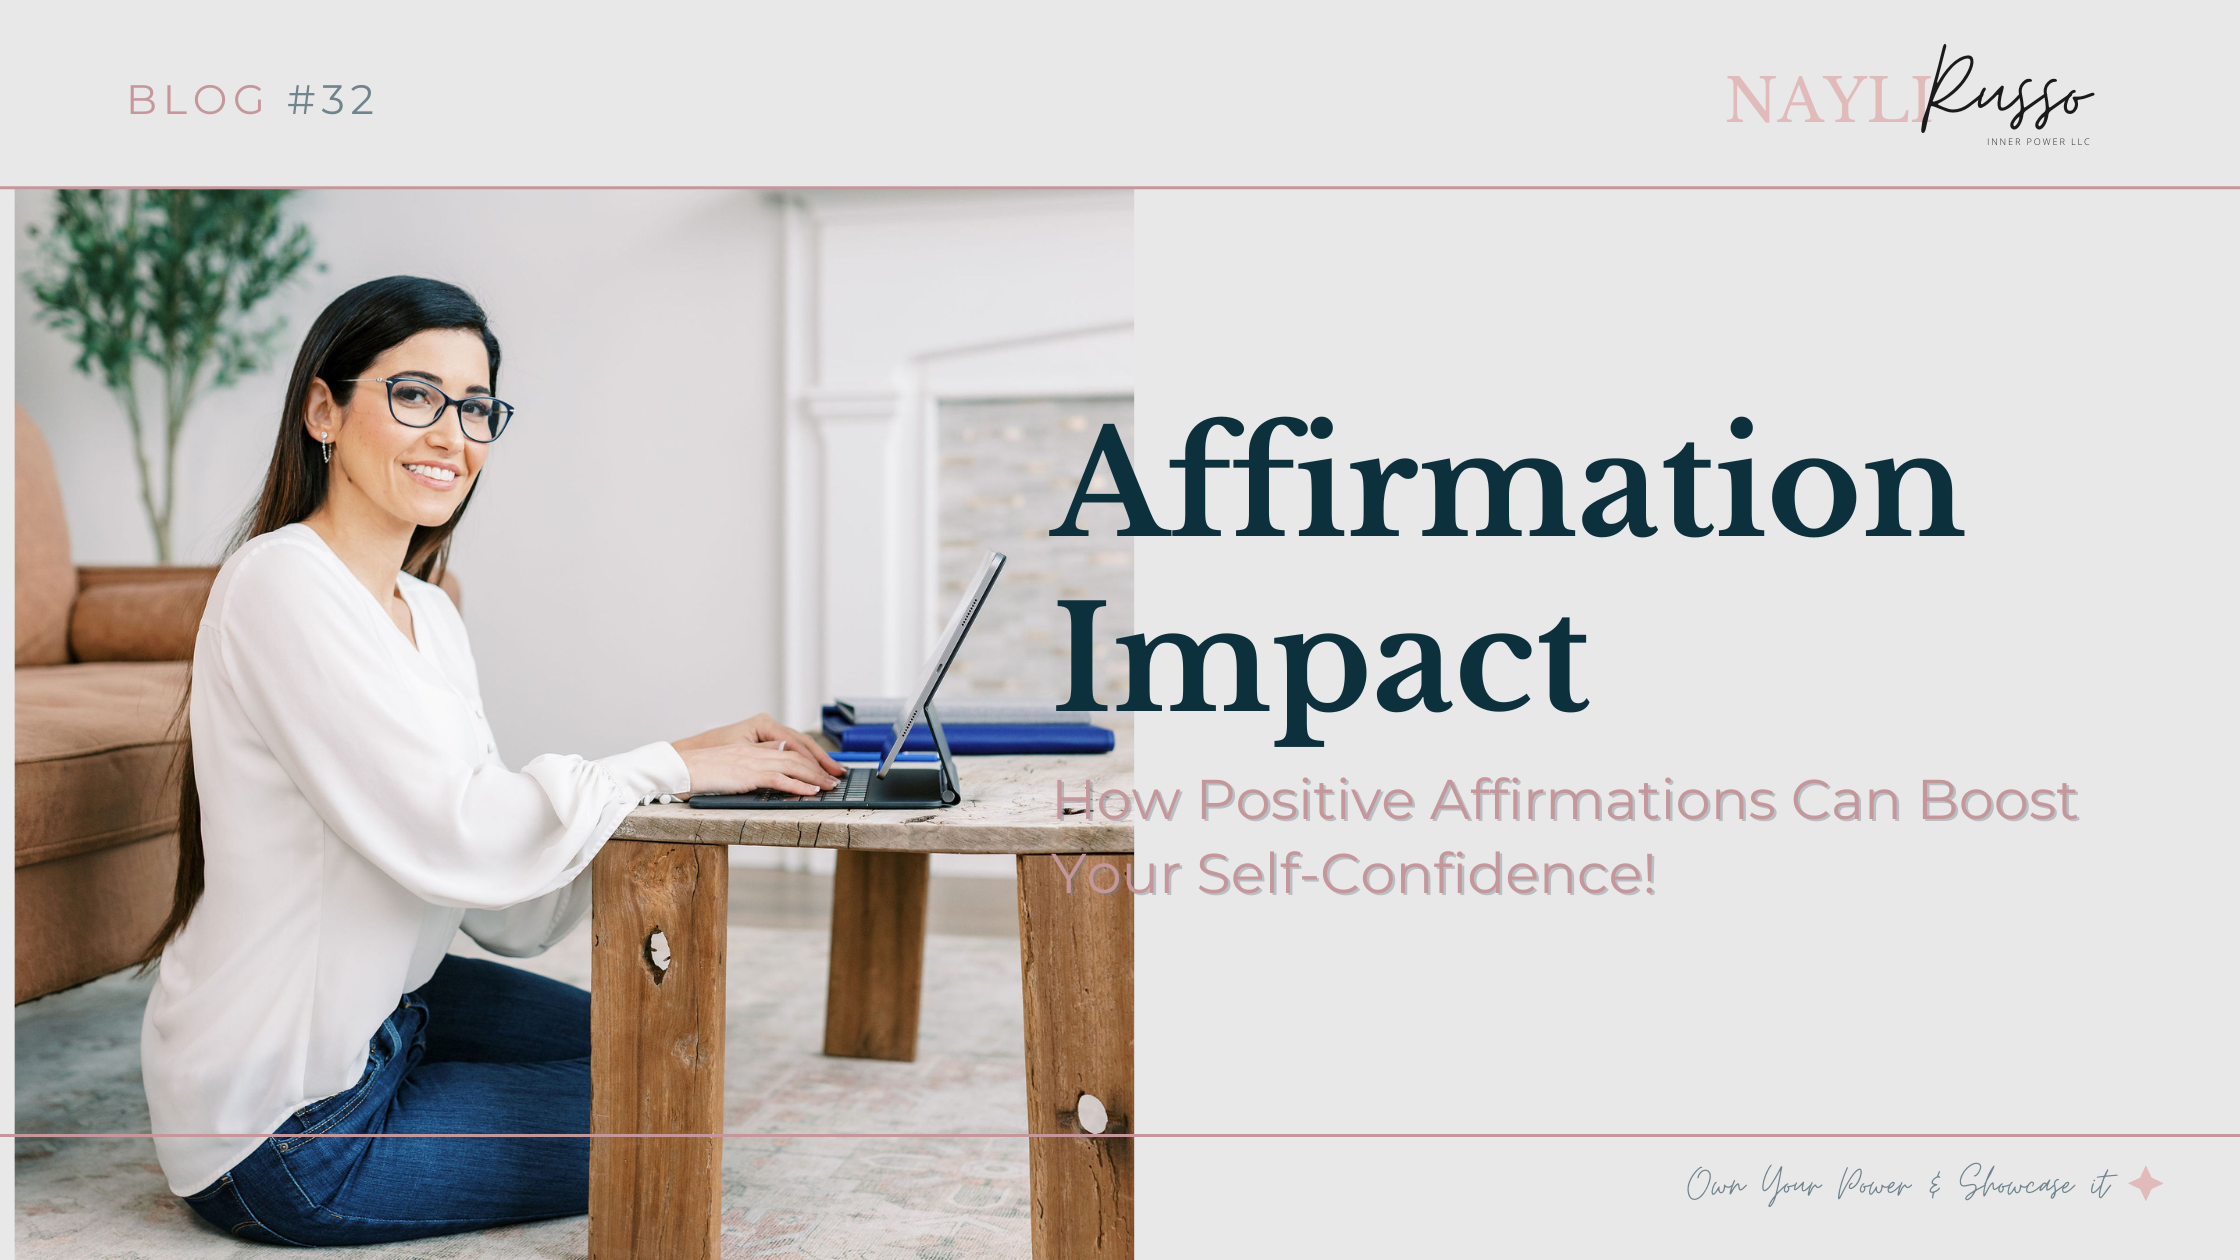 The Impact of Positive Affirmations on Self-Confidence